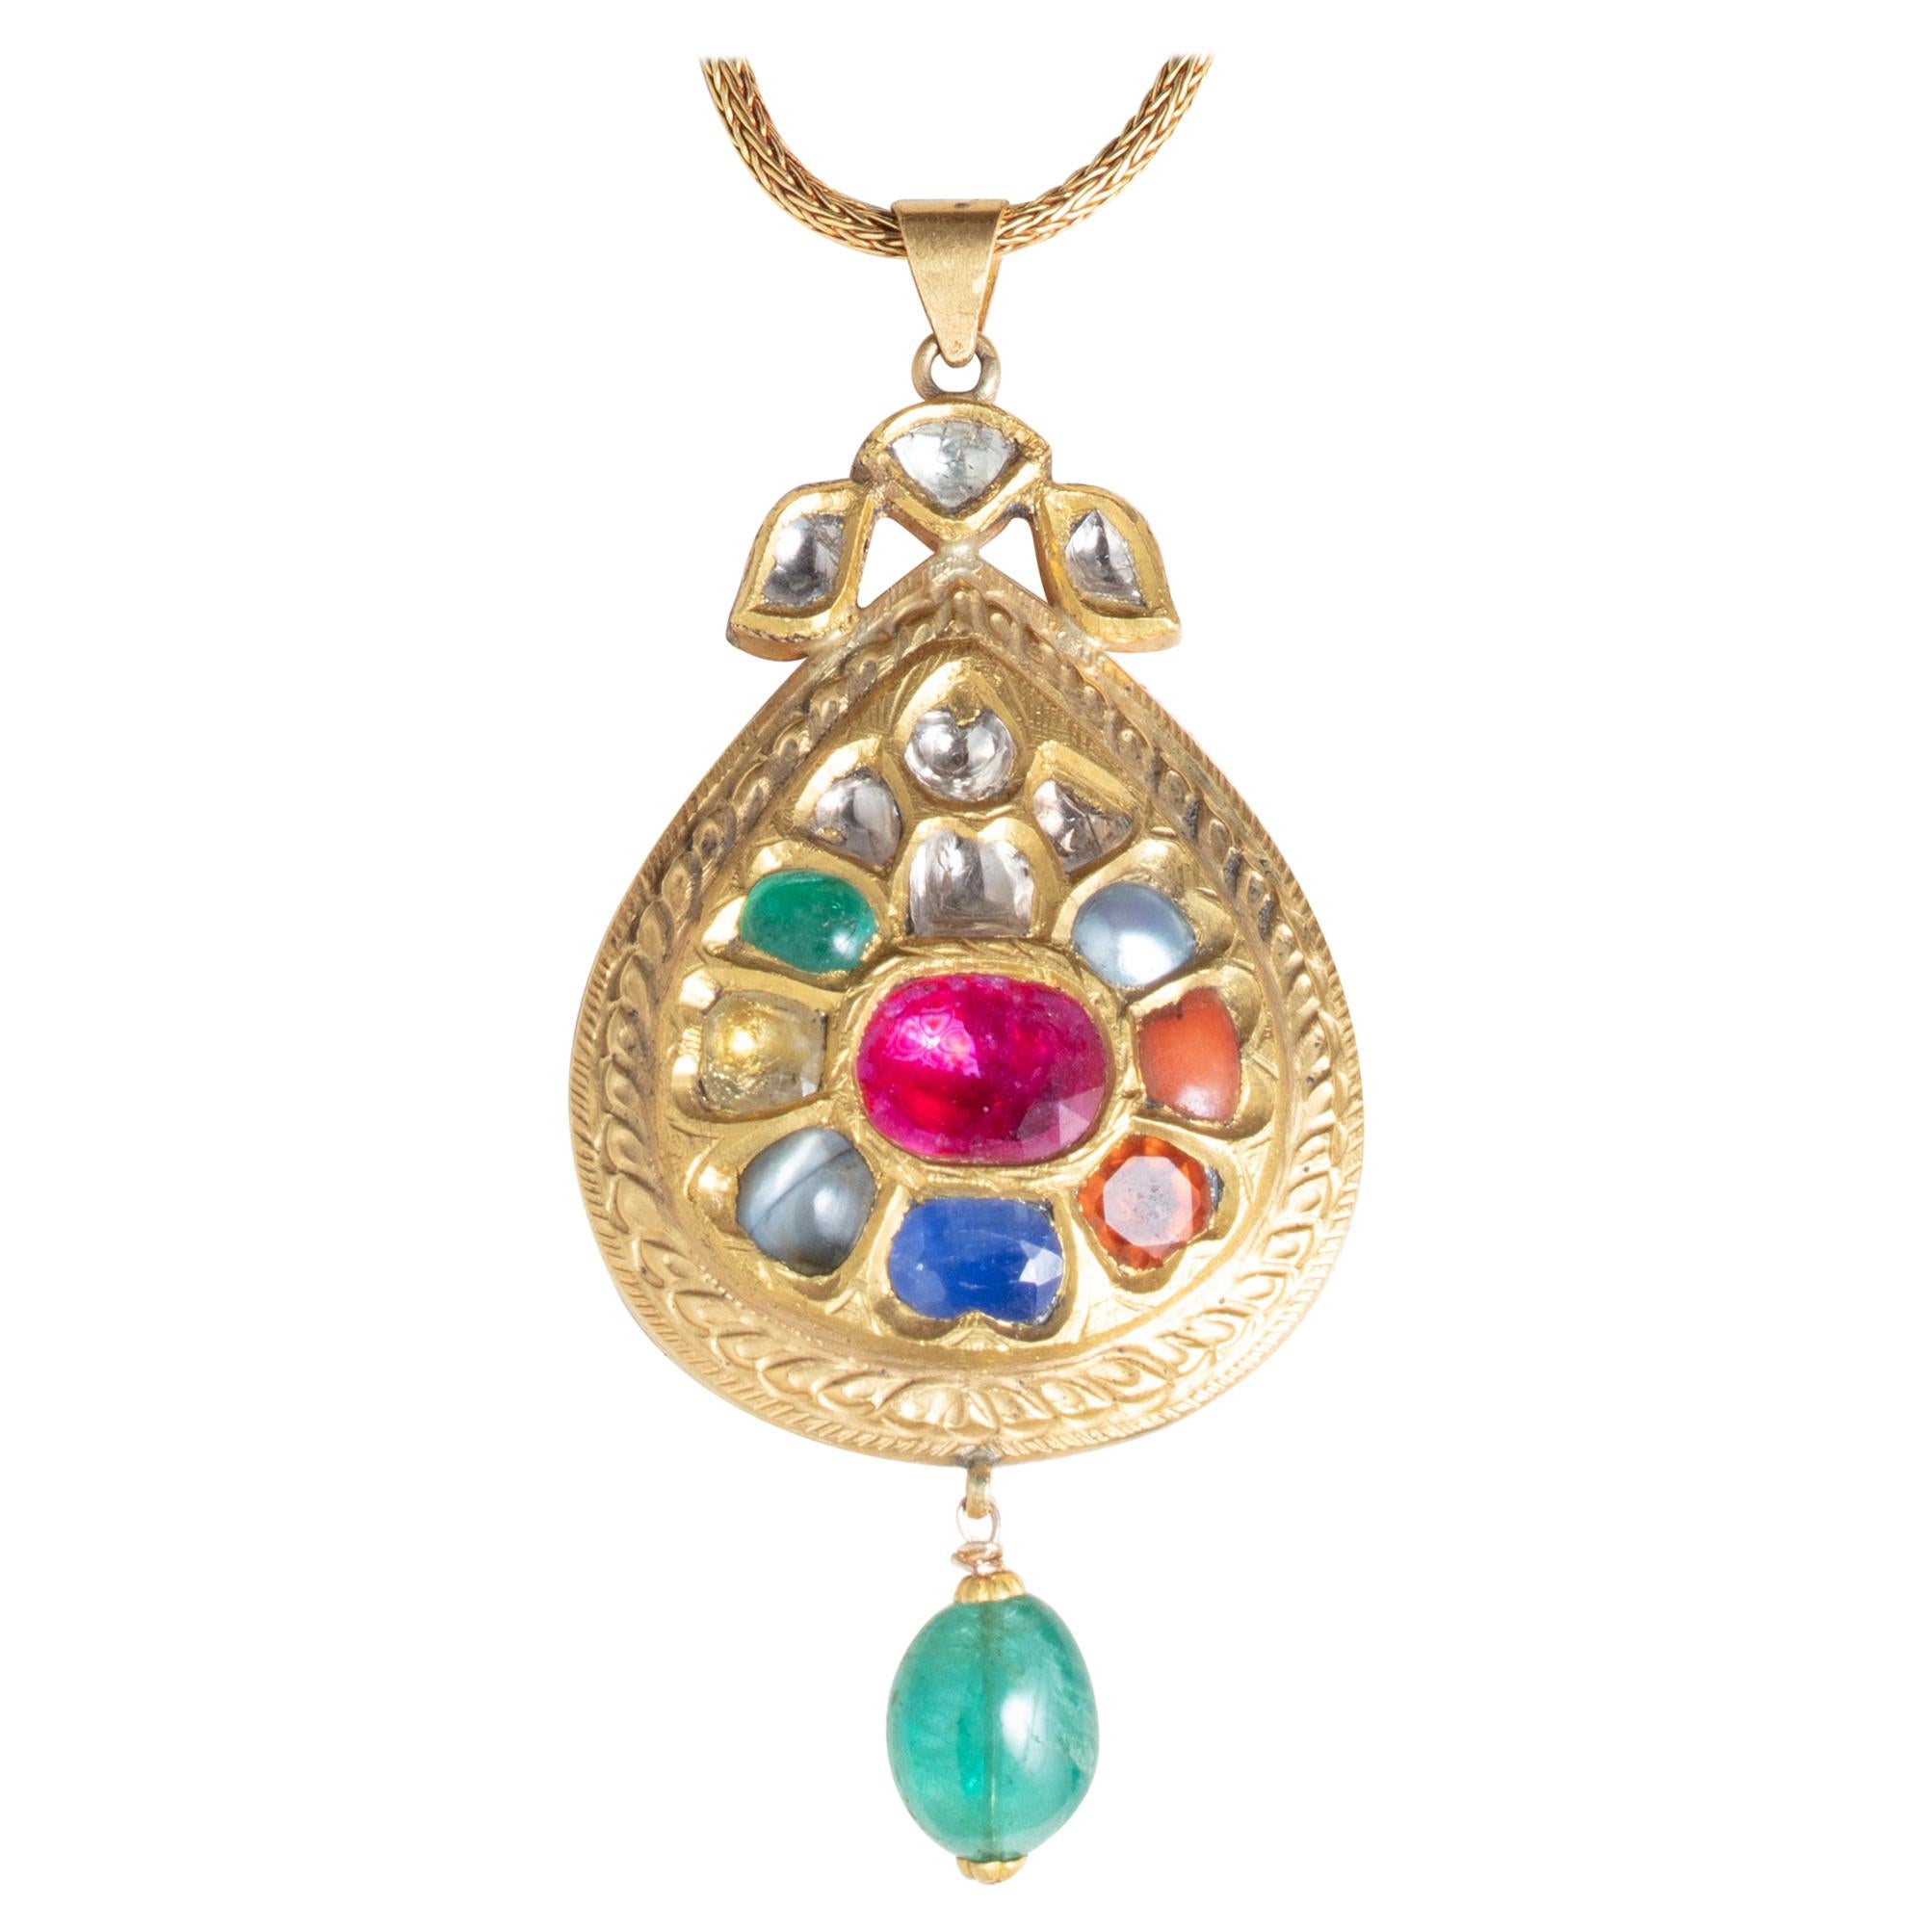 22 Karat Gold Nava Ratna Pendant on Hand-Rolled Gold Chain, India For Sale